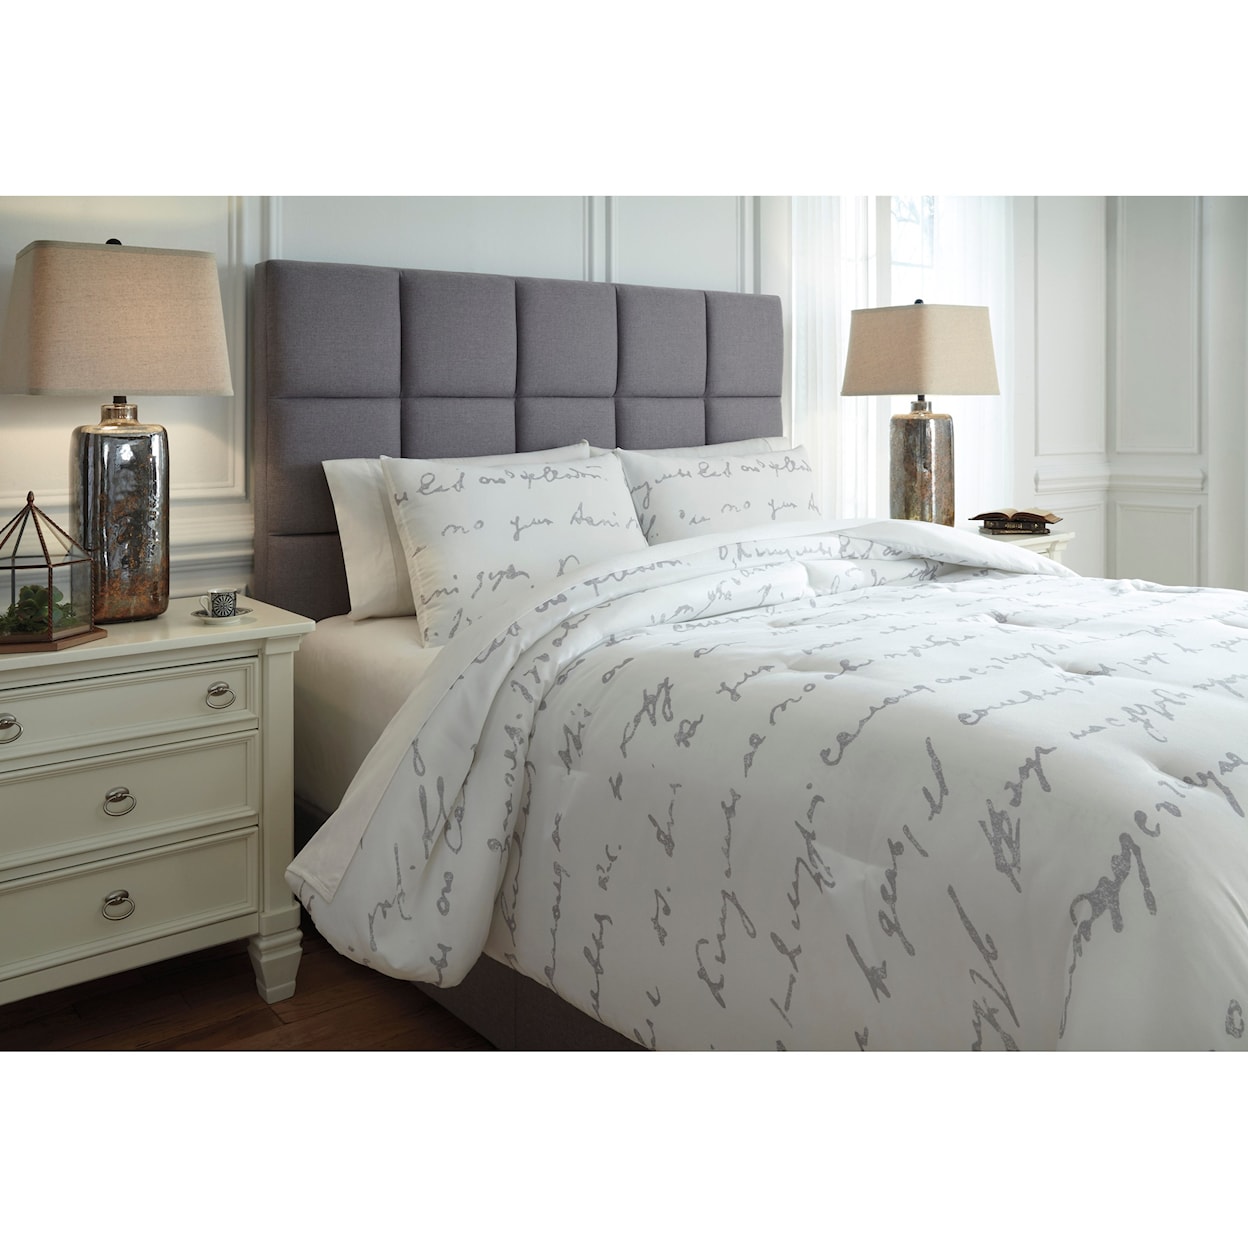 Signature Design by Ashley Bedding Sets Queen Adrianna White/Gray Comforter Set